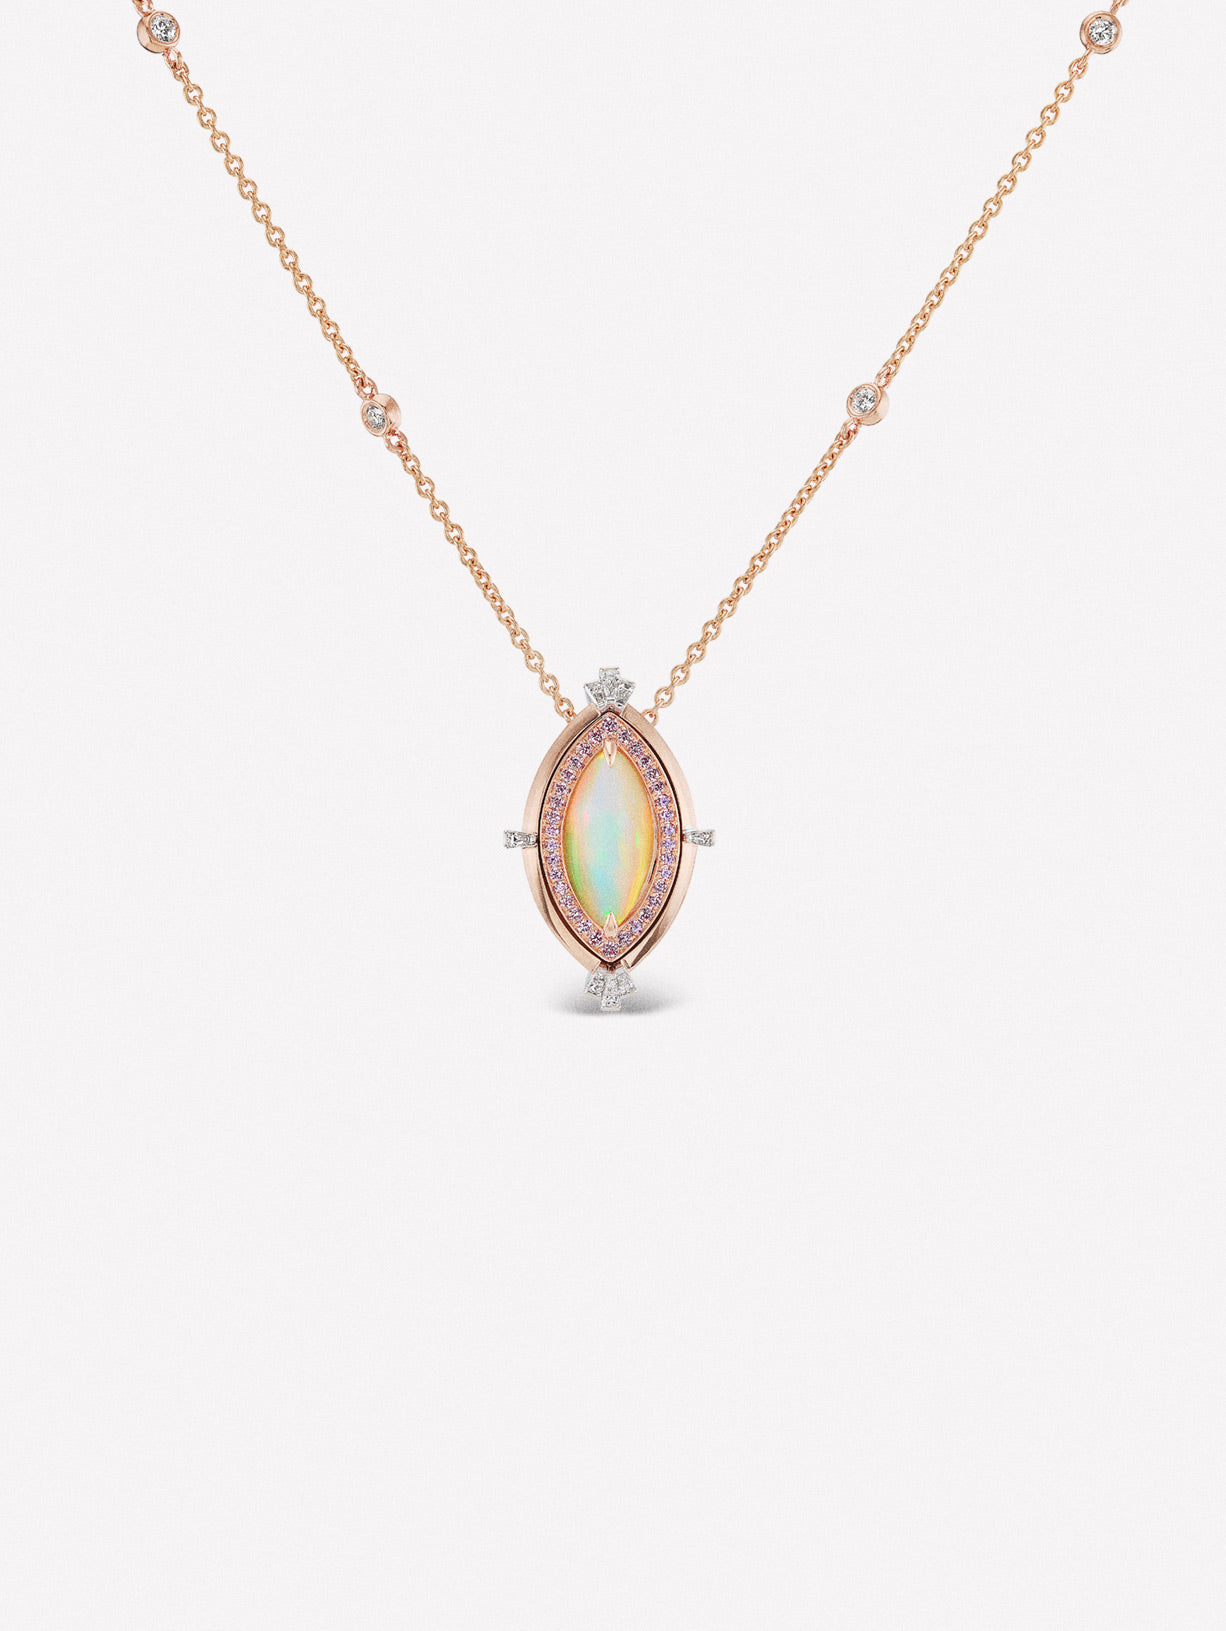 Argyle Pink™ Diamond and White Opal Necklace - Pink Diamonds, J FINE - J Fine, necklace - Pink Diamond Jewelry, argyle-pink™-diamond-and-white-opal-necklace-by-j-fine - Argyle Pink Diamon